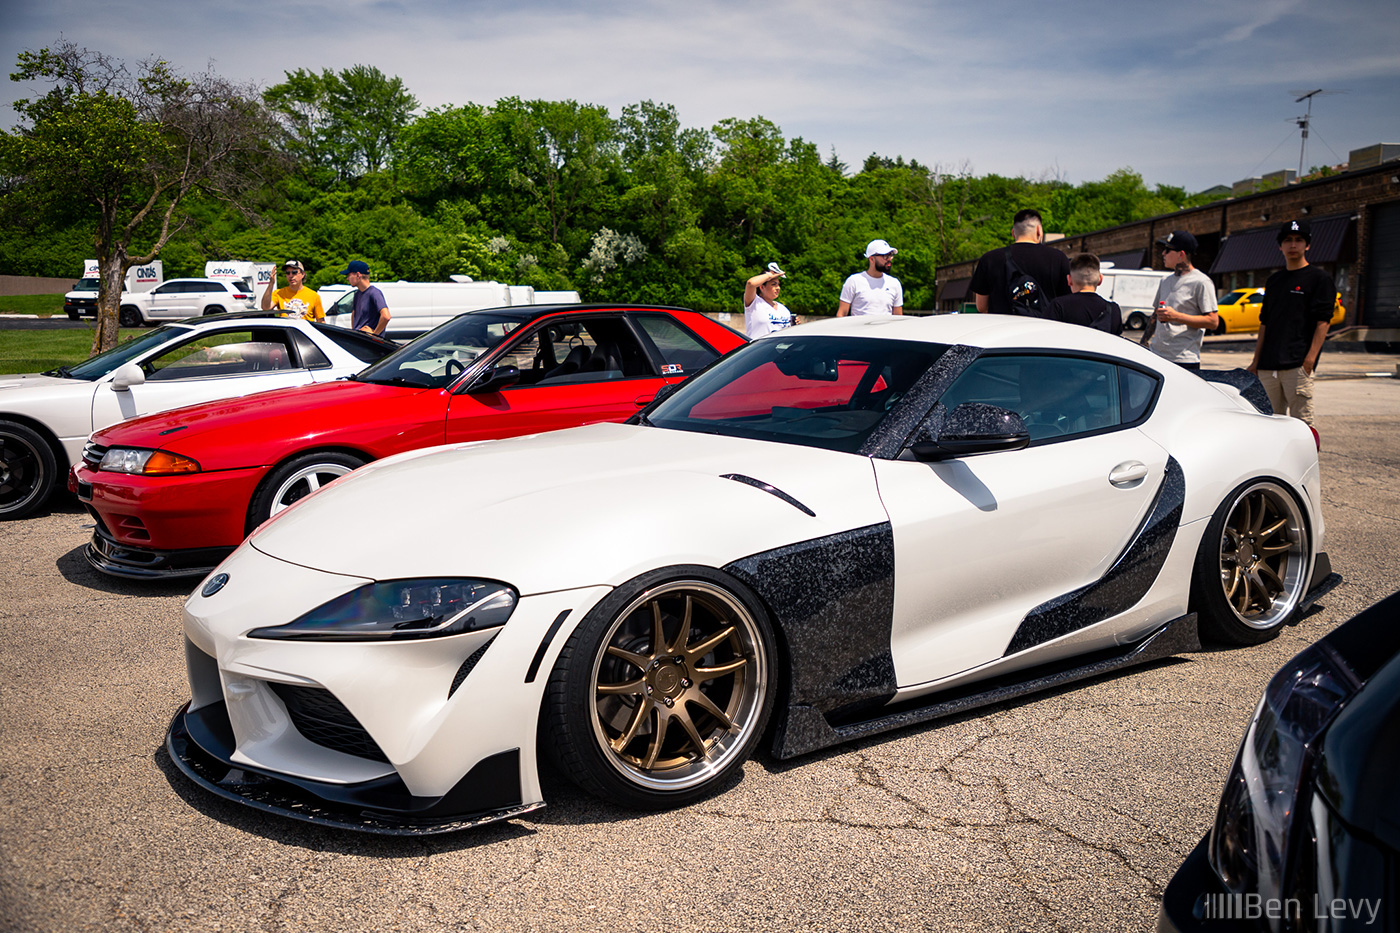 Bagged Mk4 Toyota Supra with Composite Carbon Wrap